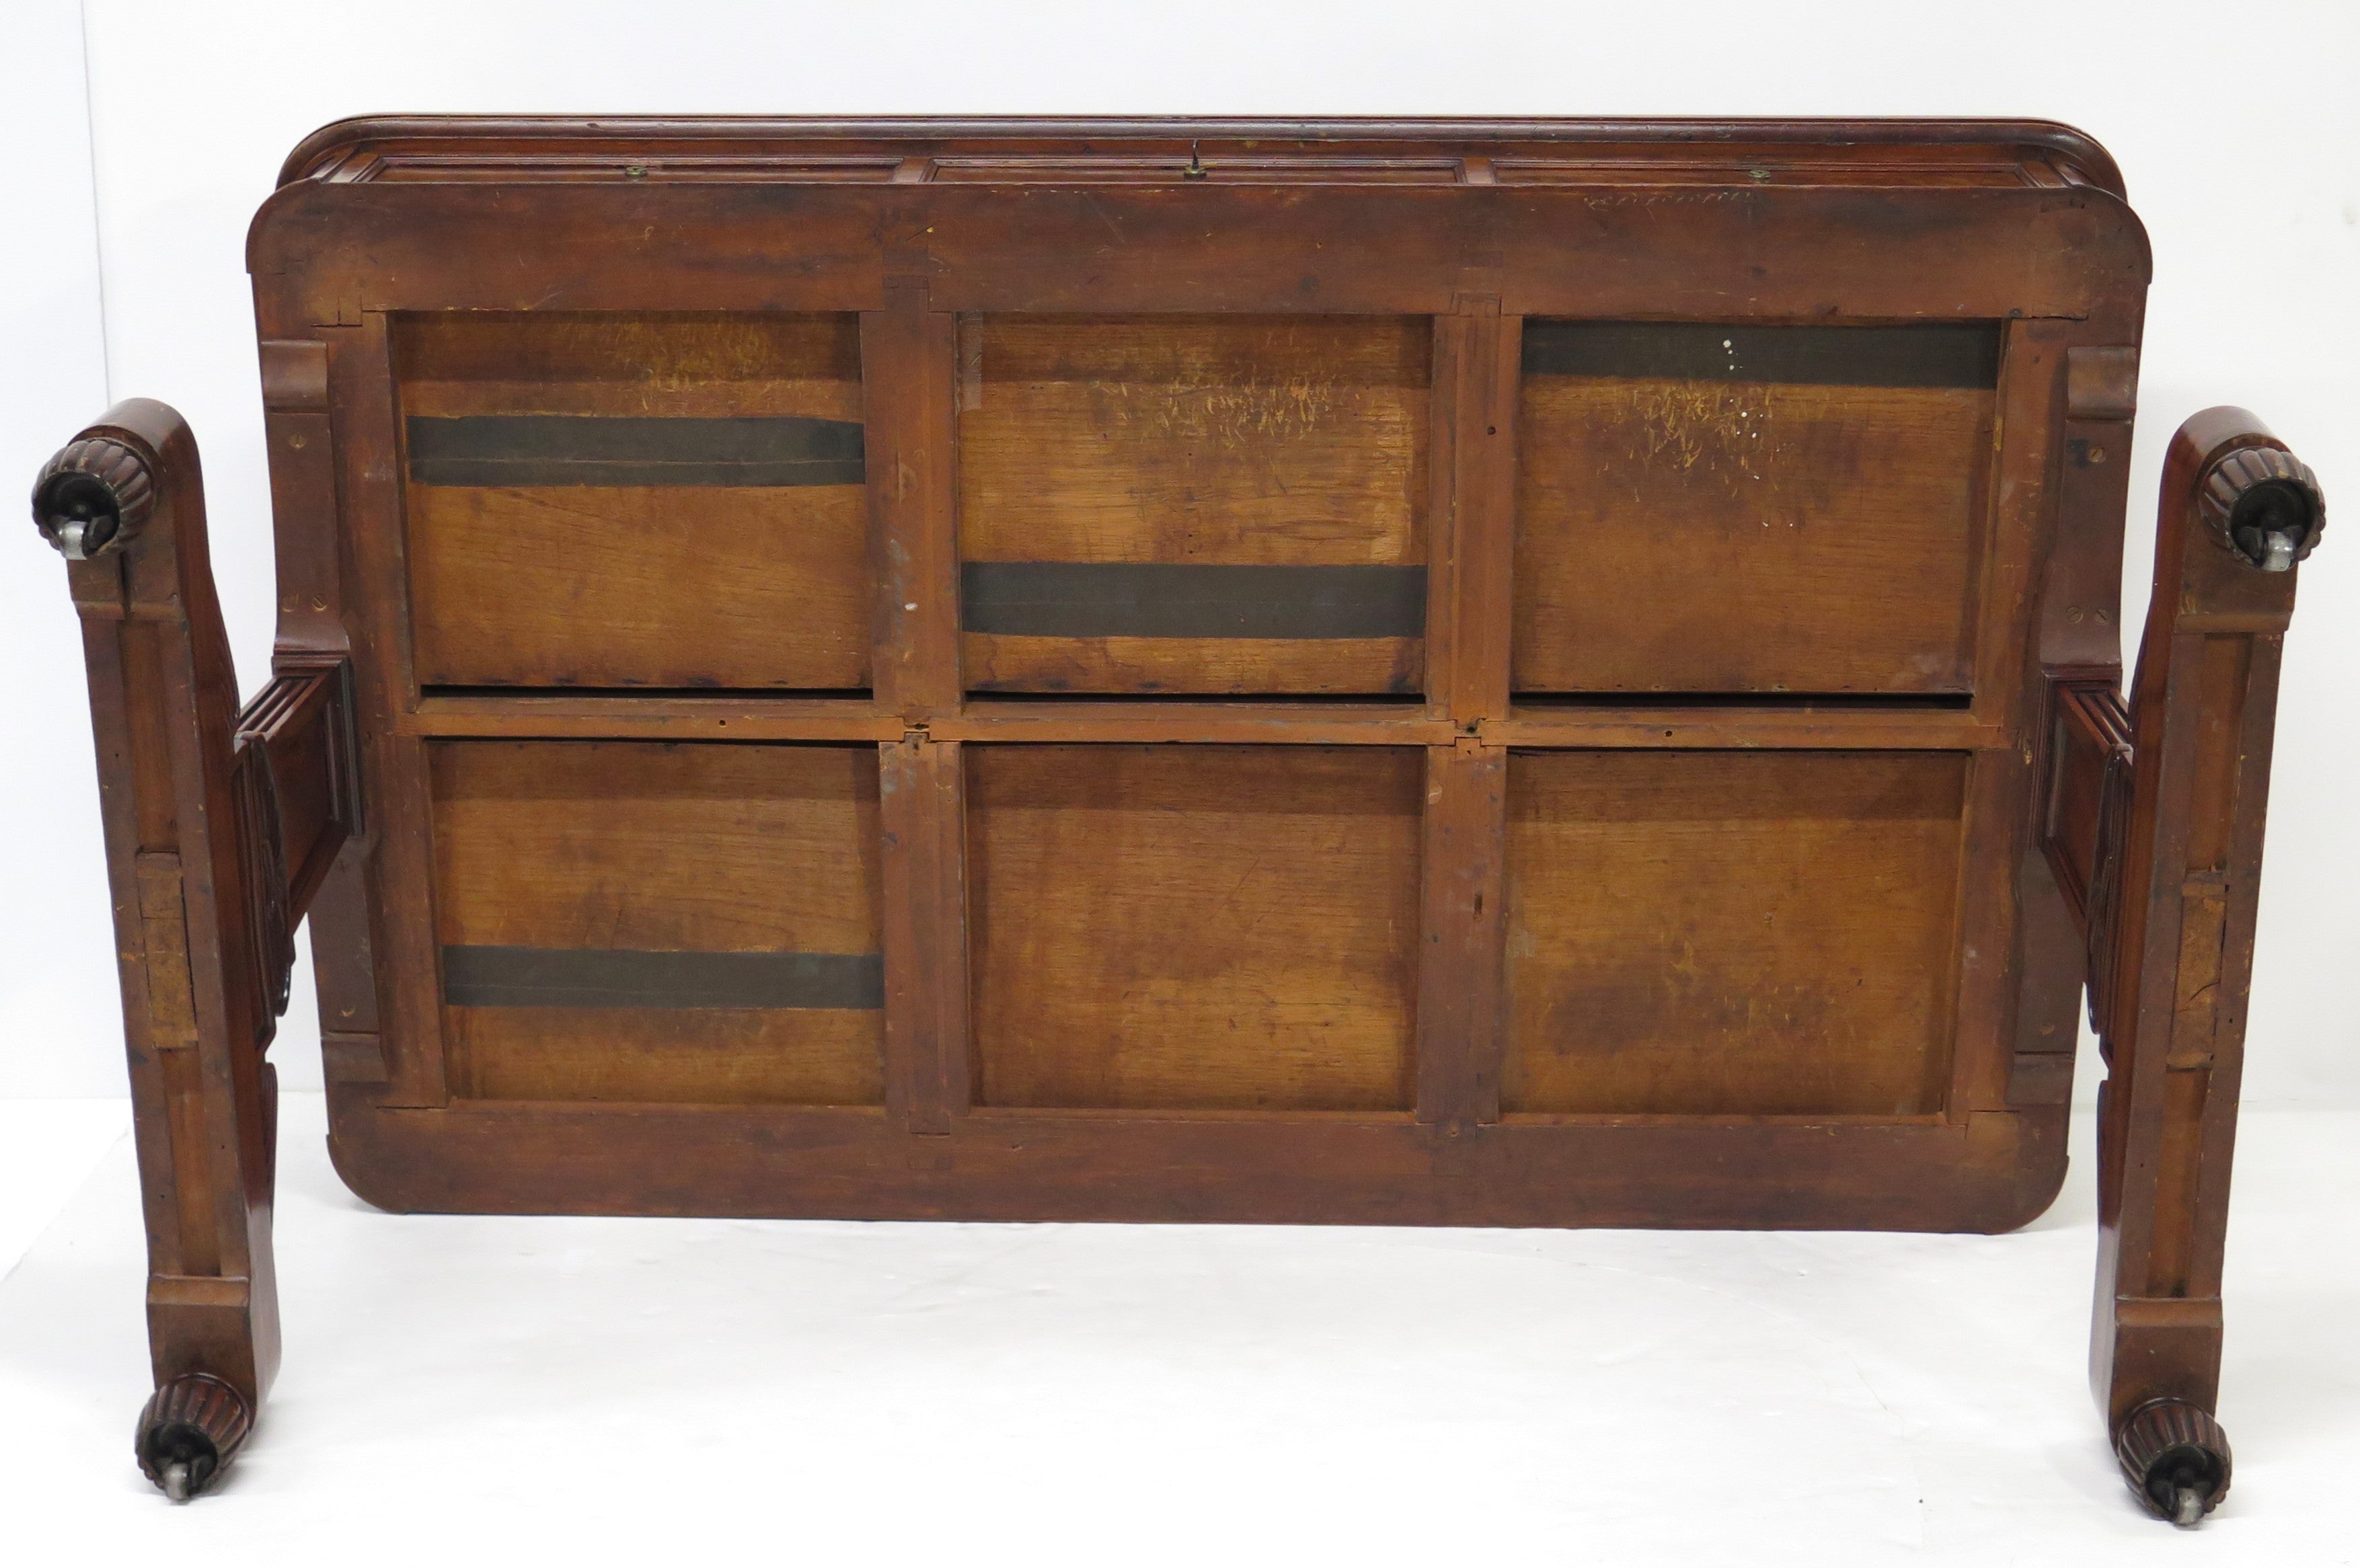 A William IV Mahogany Library Table / Writing Desk